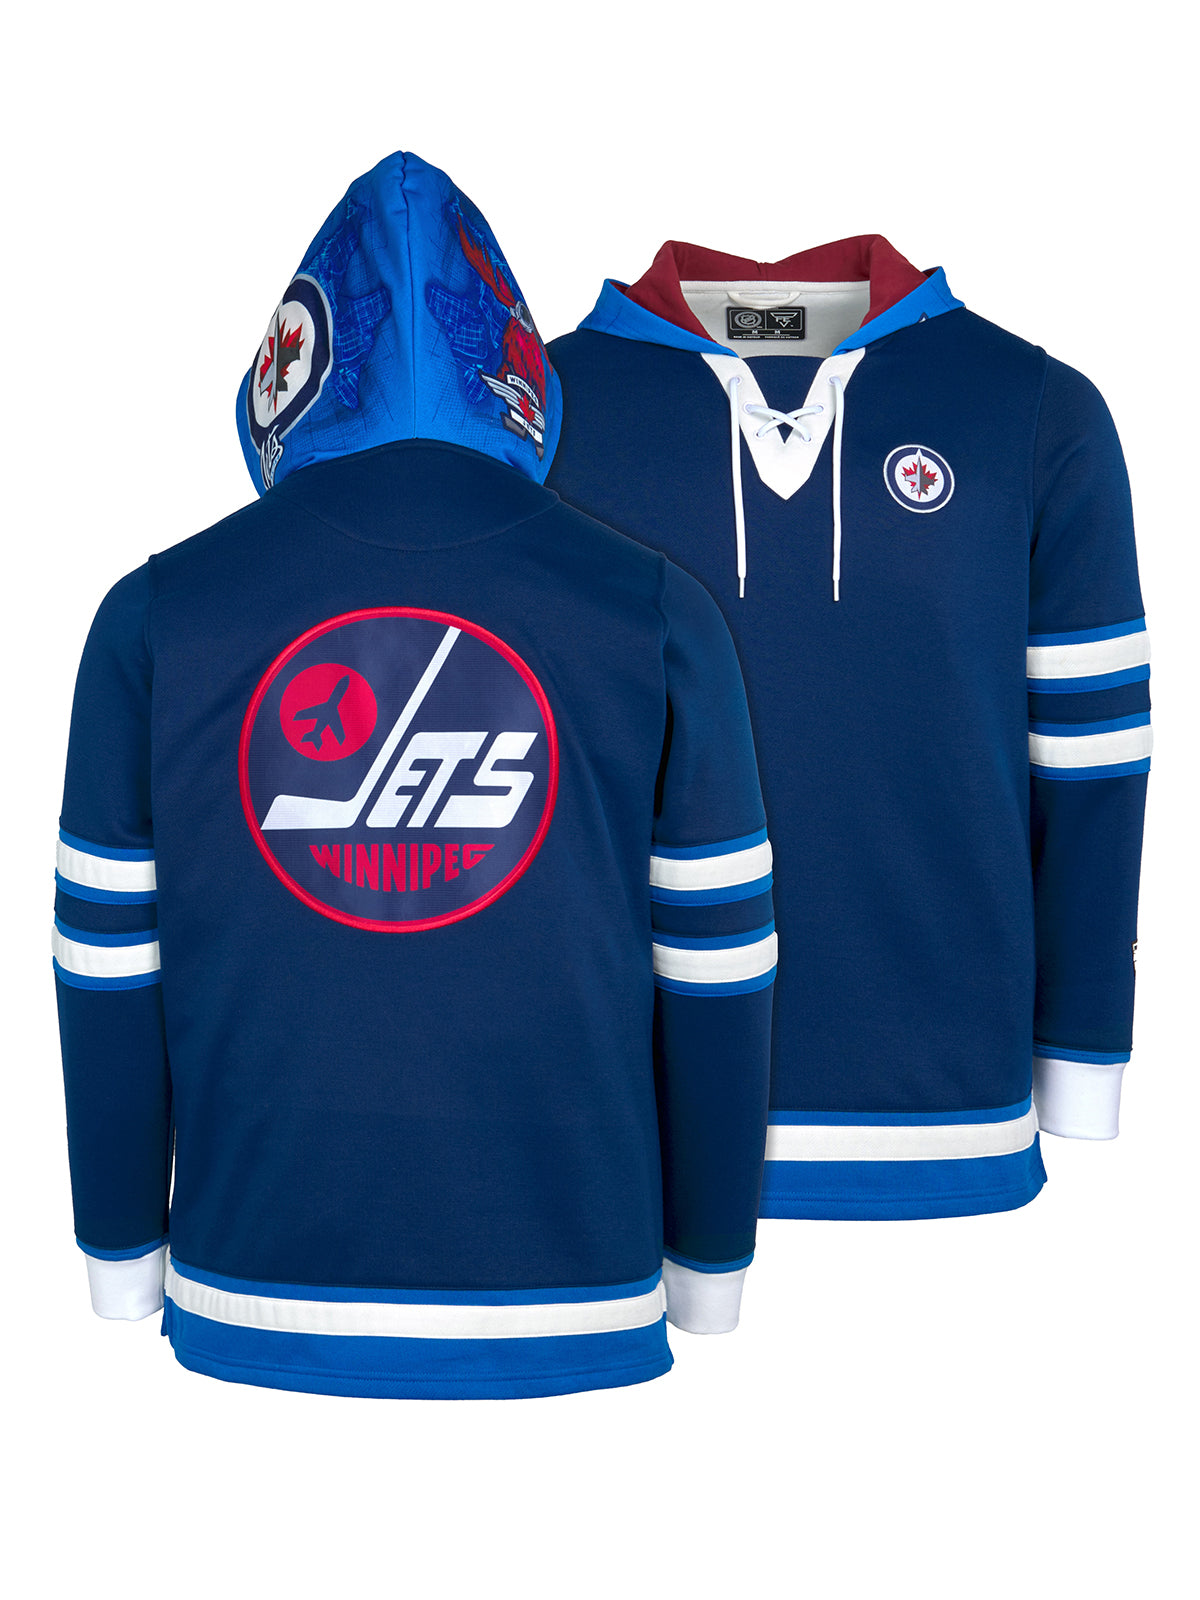 Winnipeg Jets Lace-Up Hoodie - Hand drawn custom hood designs with all the team colors and craftmanship to replicate the gameday jersey of this NHL hoodie